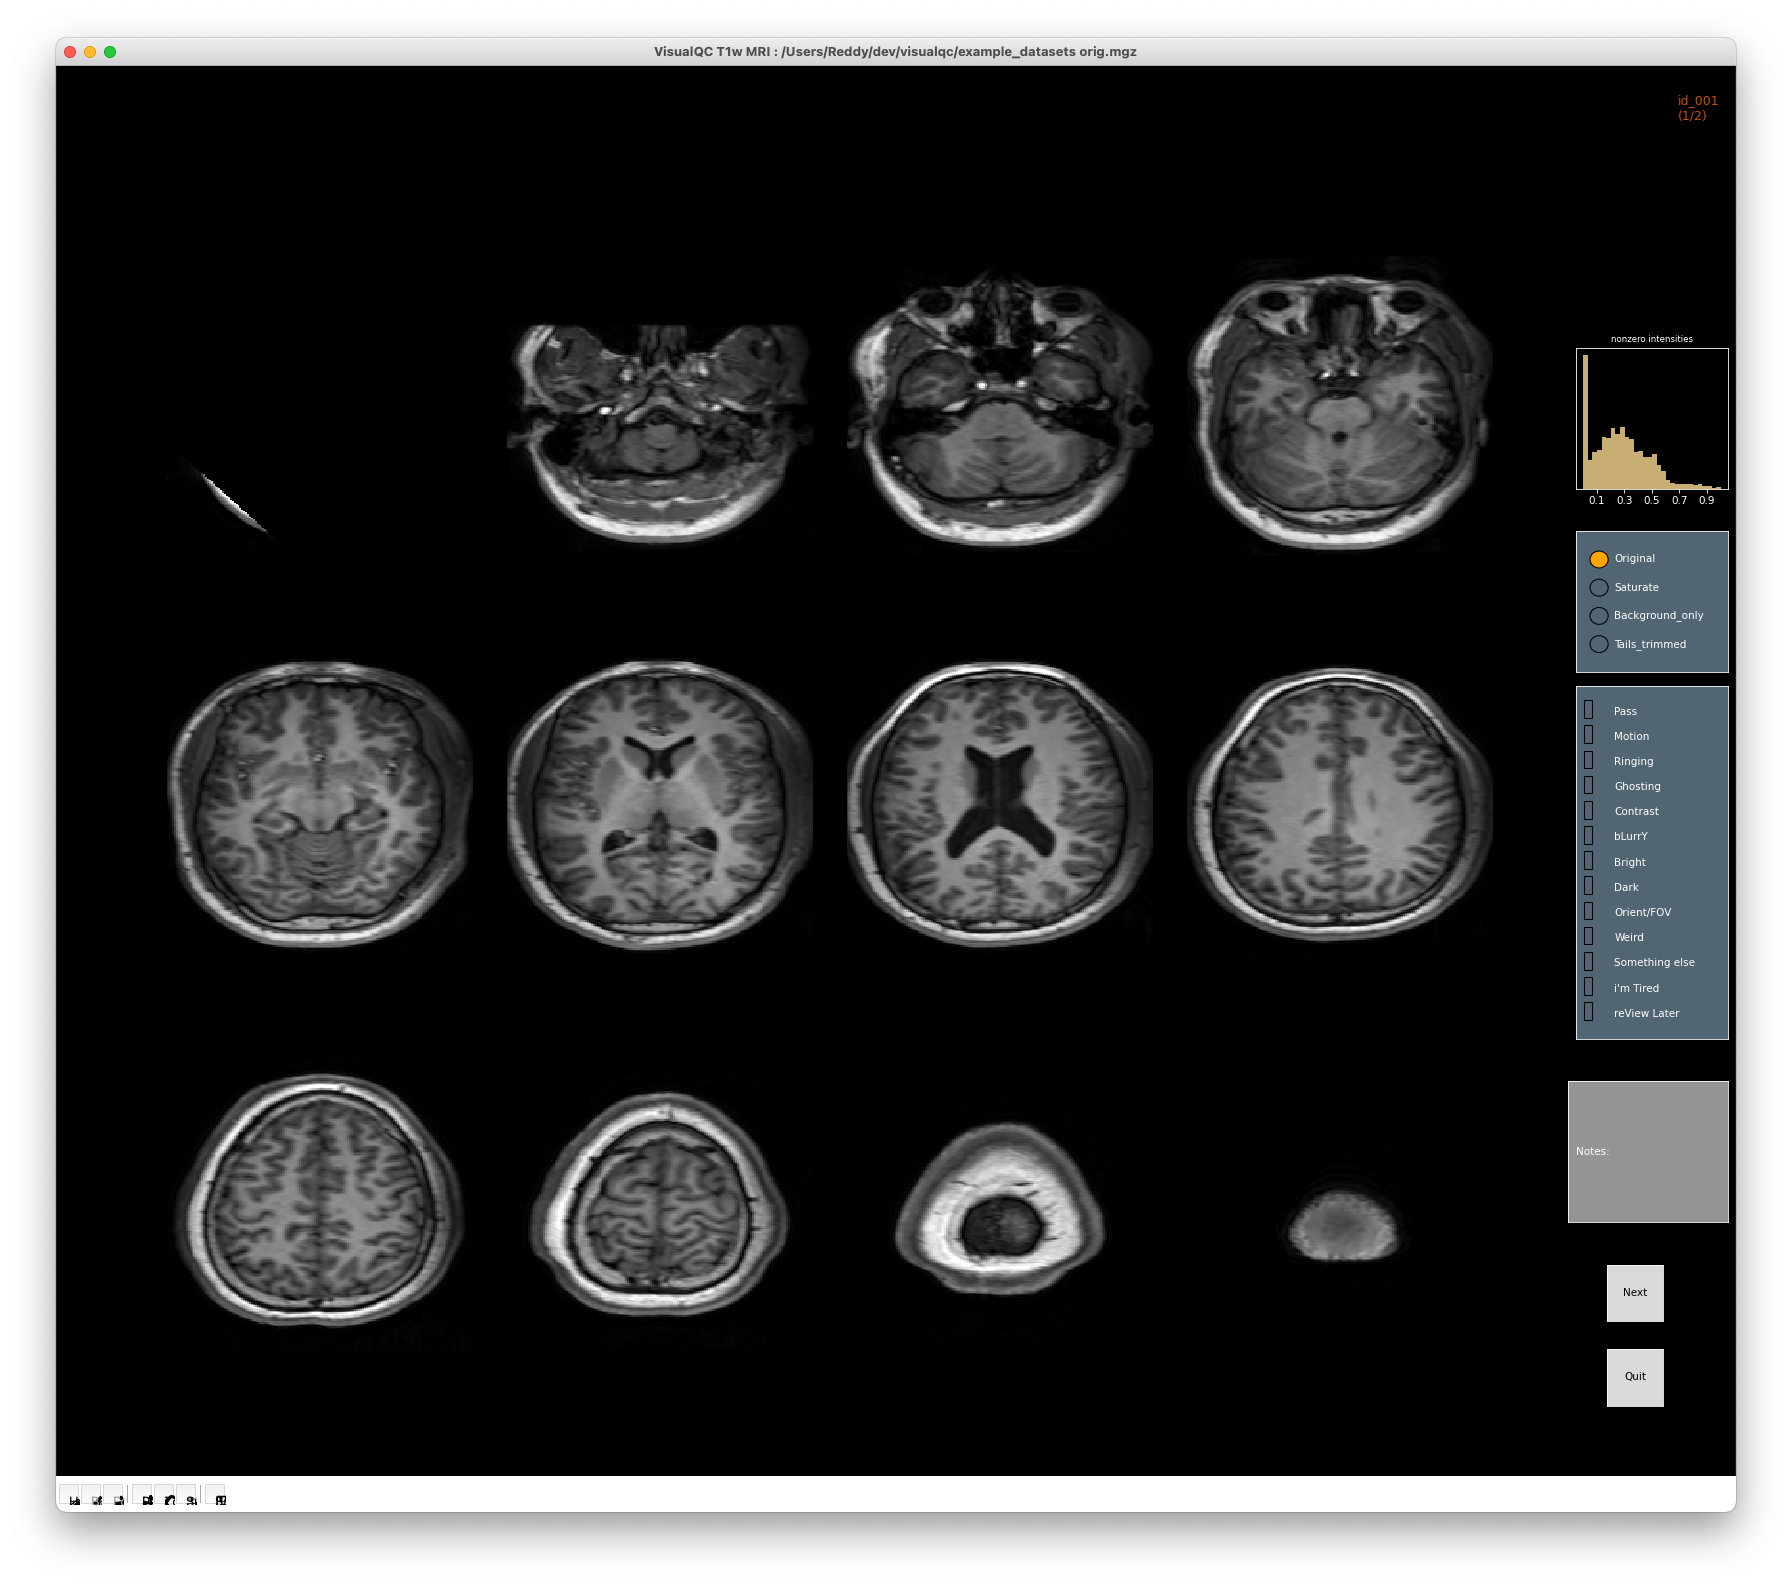 _images/t1_mri_simple_single_view.png